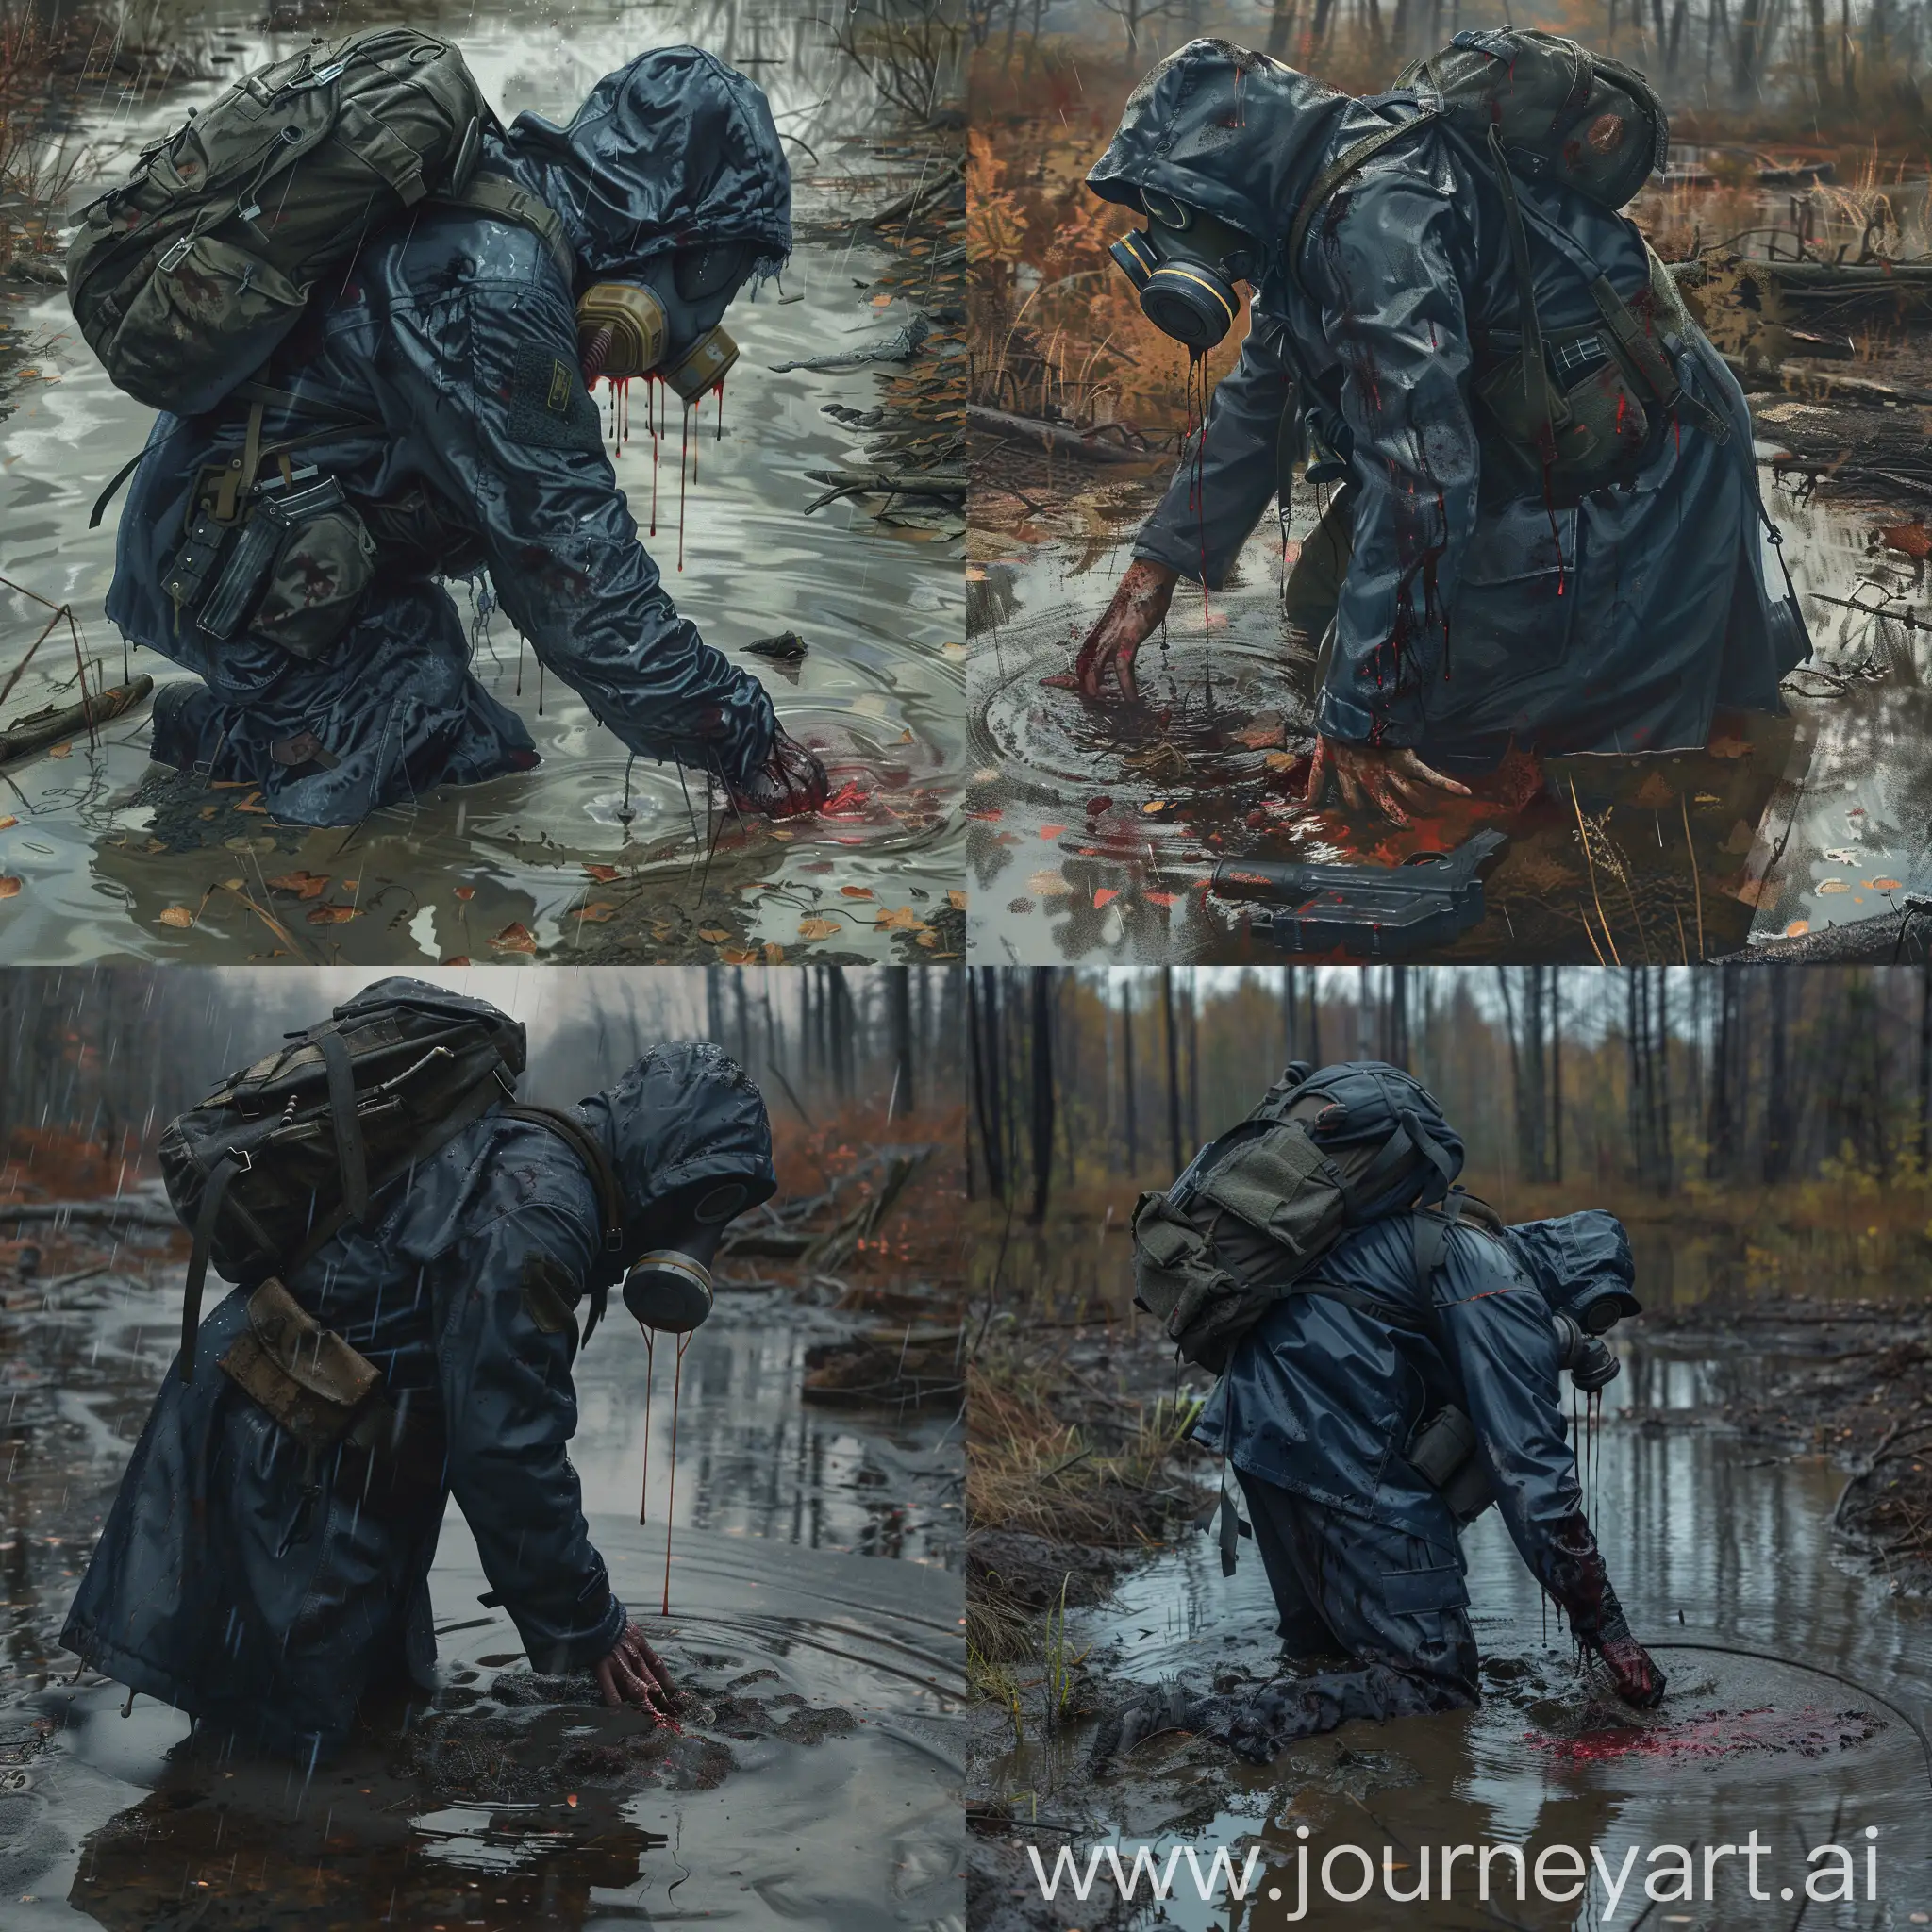 The STALKER universe, a mercenary in a dark blue military raincoat, in military unloading, with a backpack on his back, a gasmask on the mercenary's face, a mercenary die in a dirty large puddle in the middle of a swamp, he covers a deep bloody wound in body, radioactive rain drips on the mercenary, the weather is gloomy autumn.